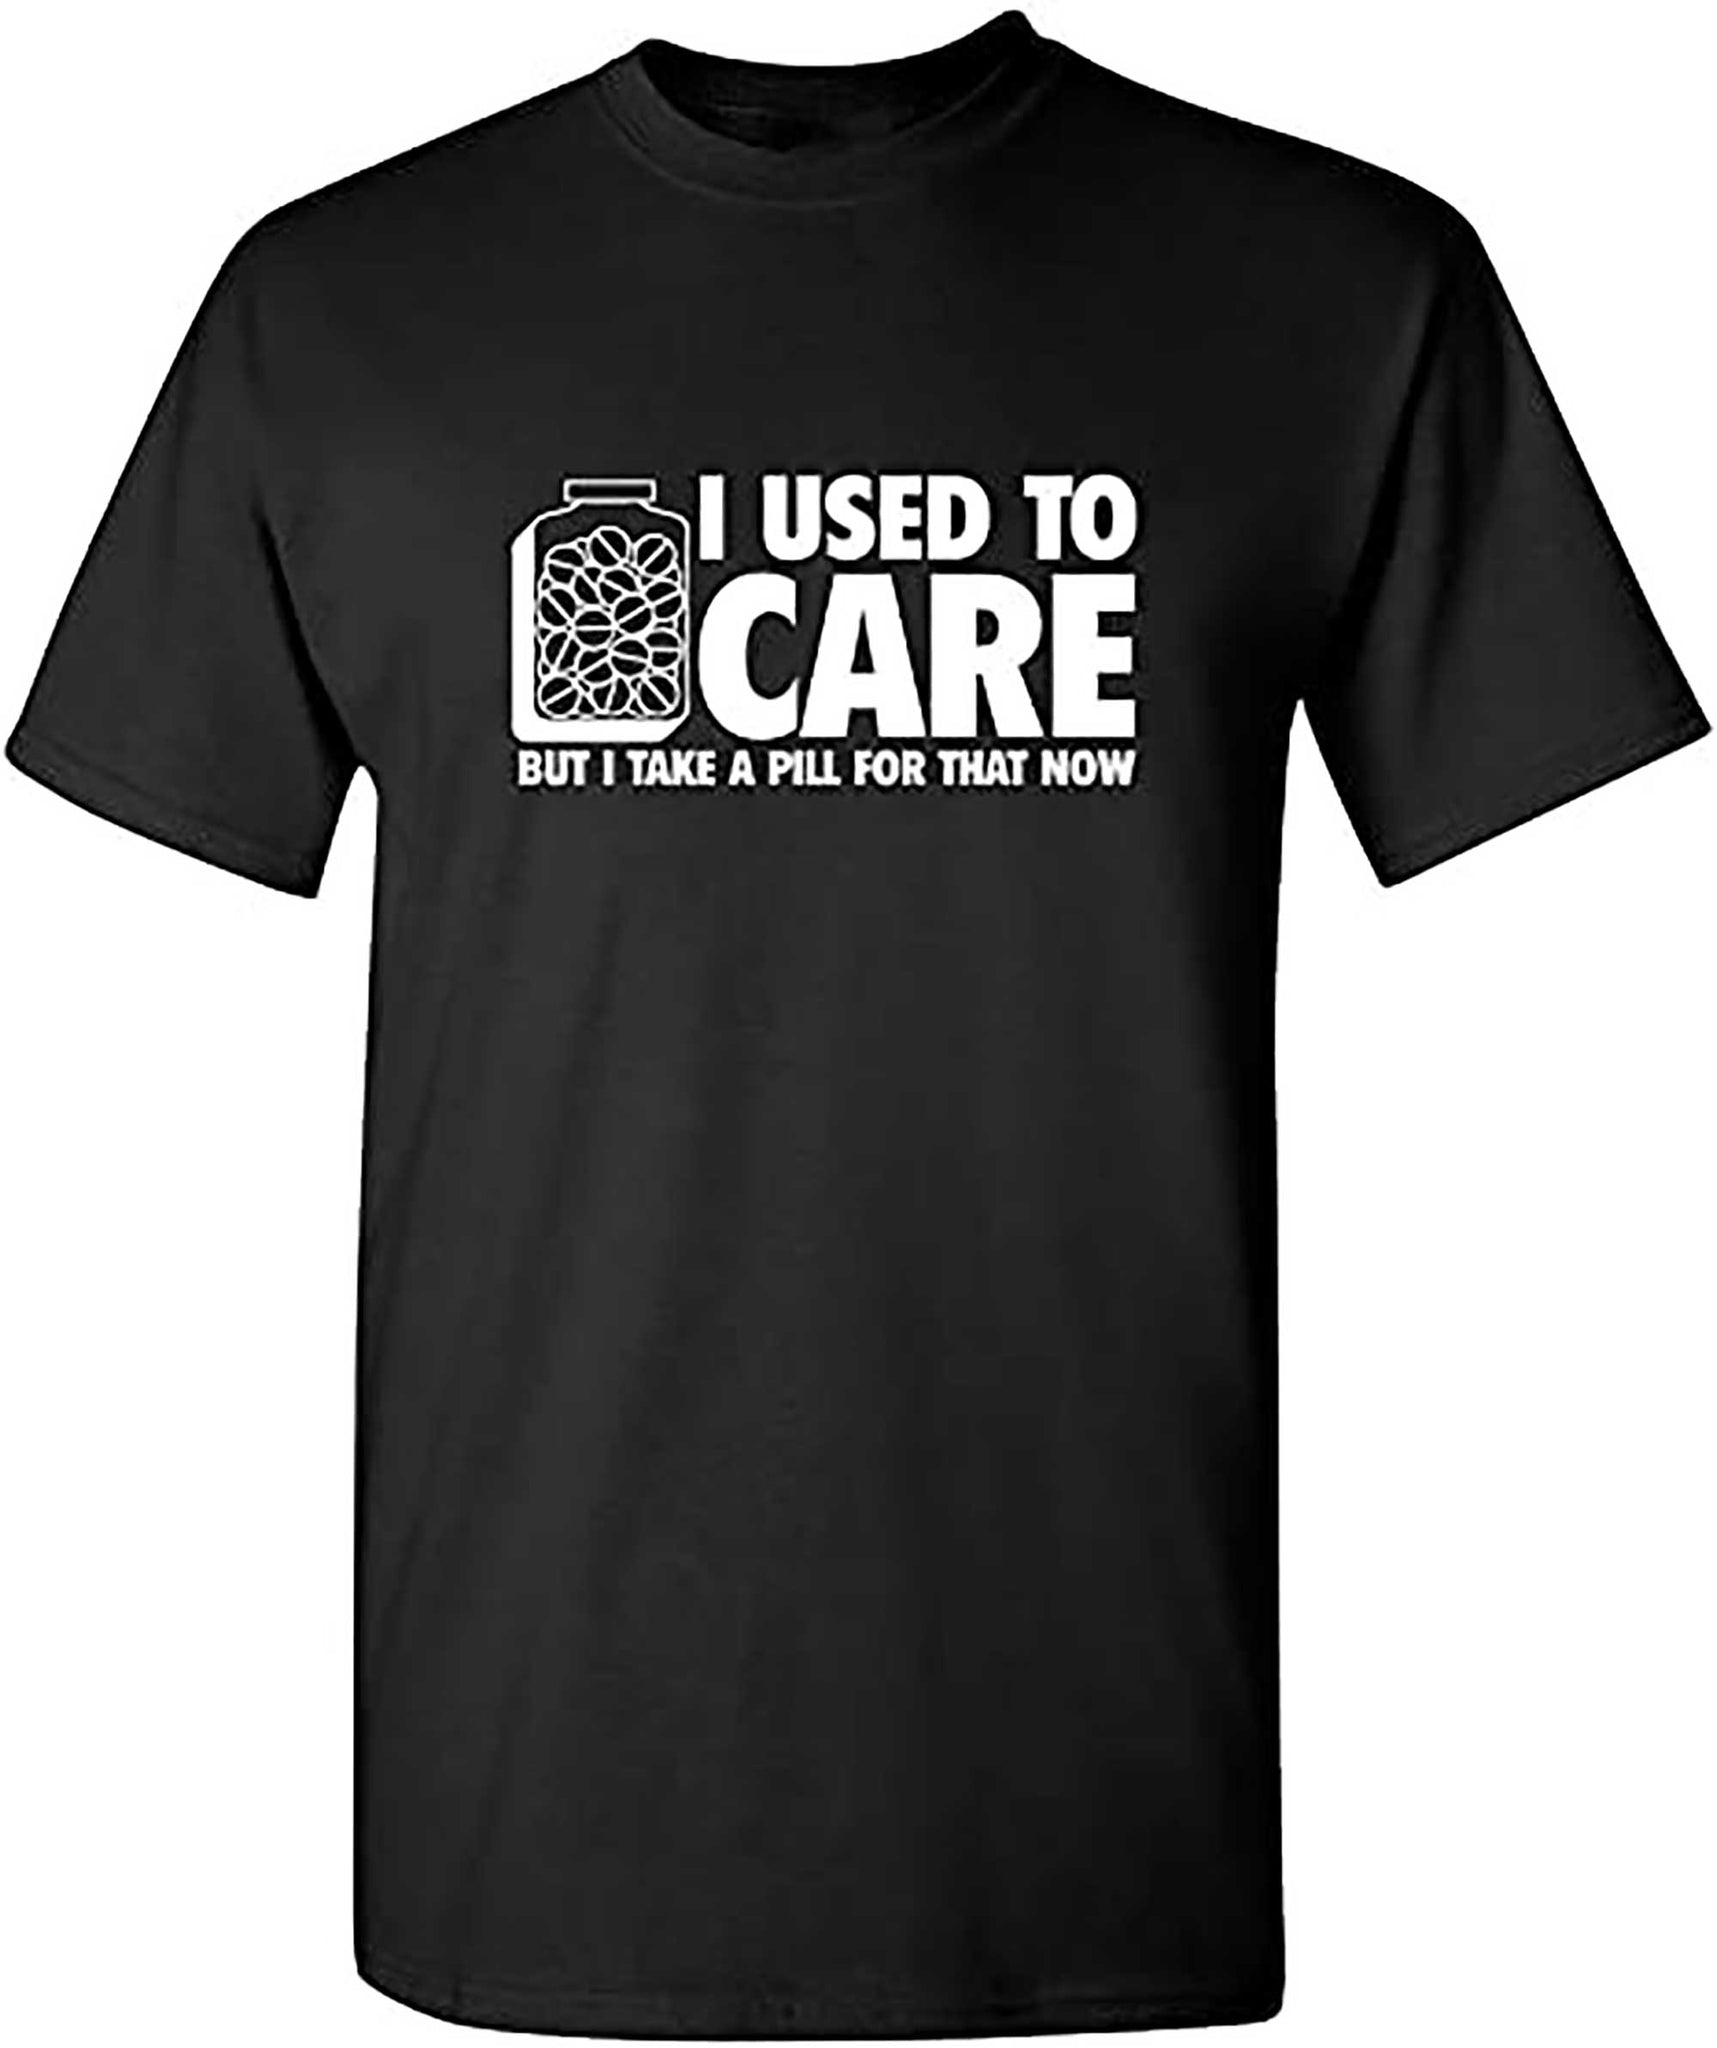 Skitongifts I Take A Pill For That Now Adult Humor Graphic Novelty Sarcastic Funny T Shirt